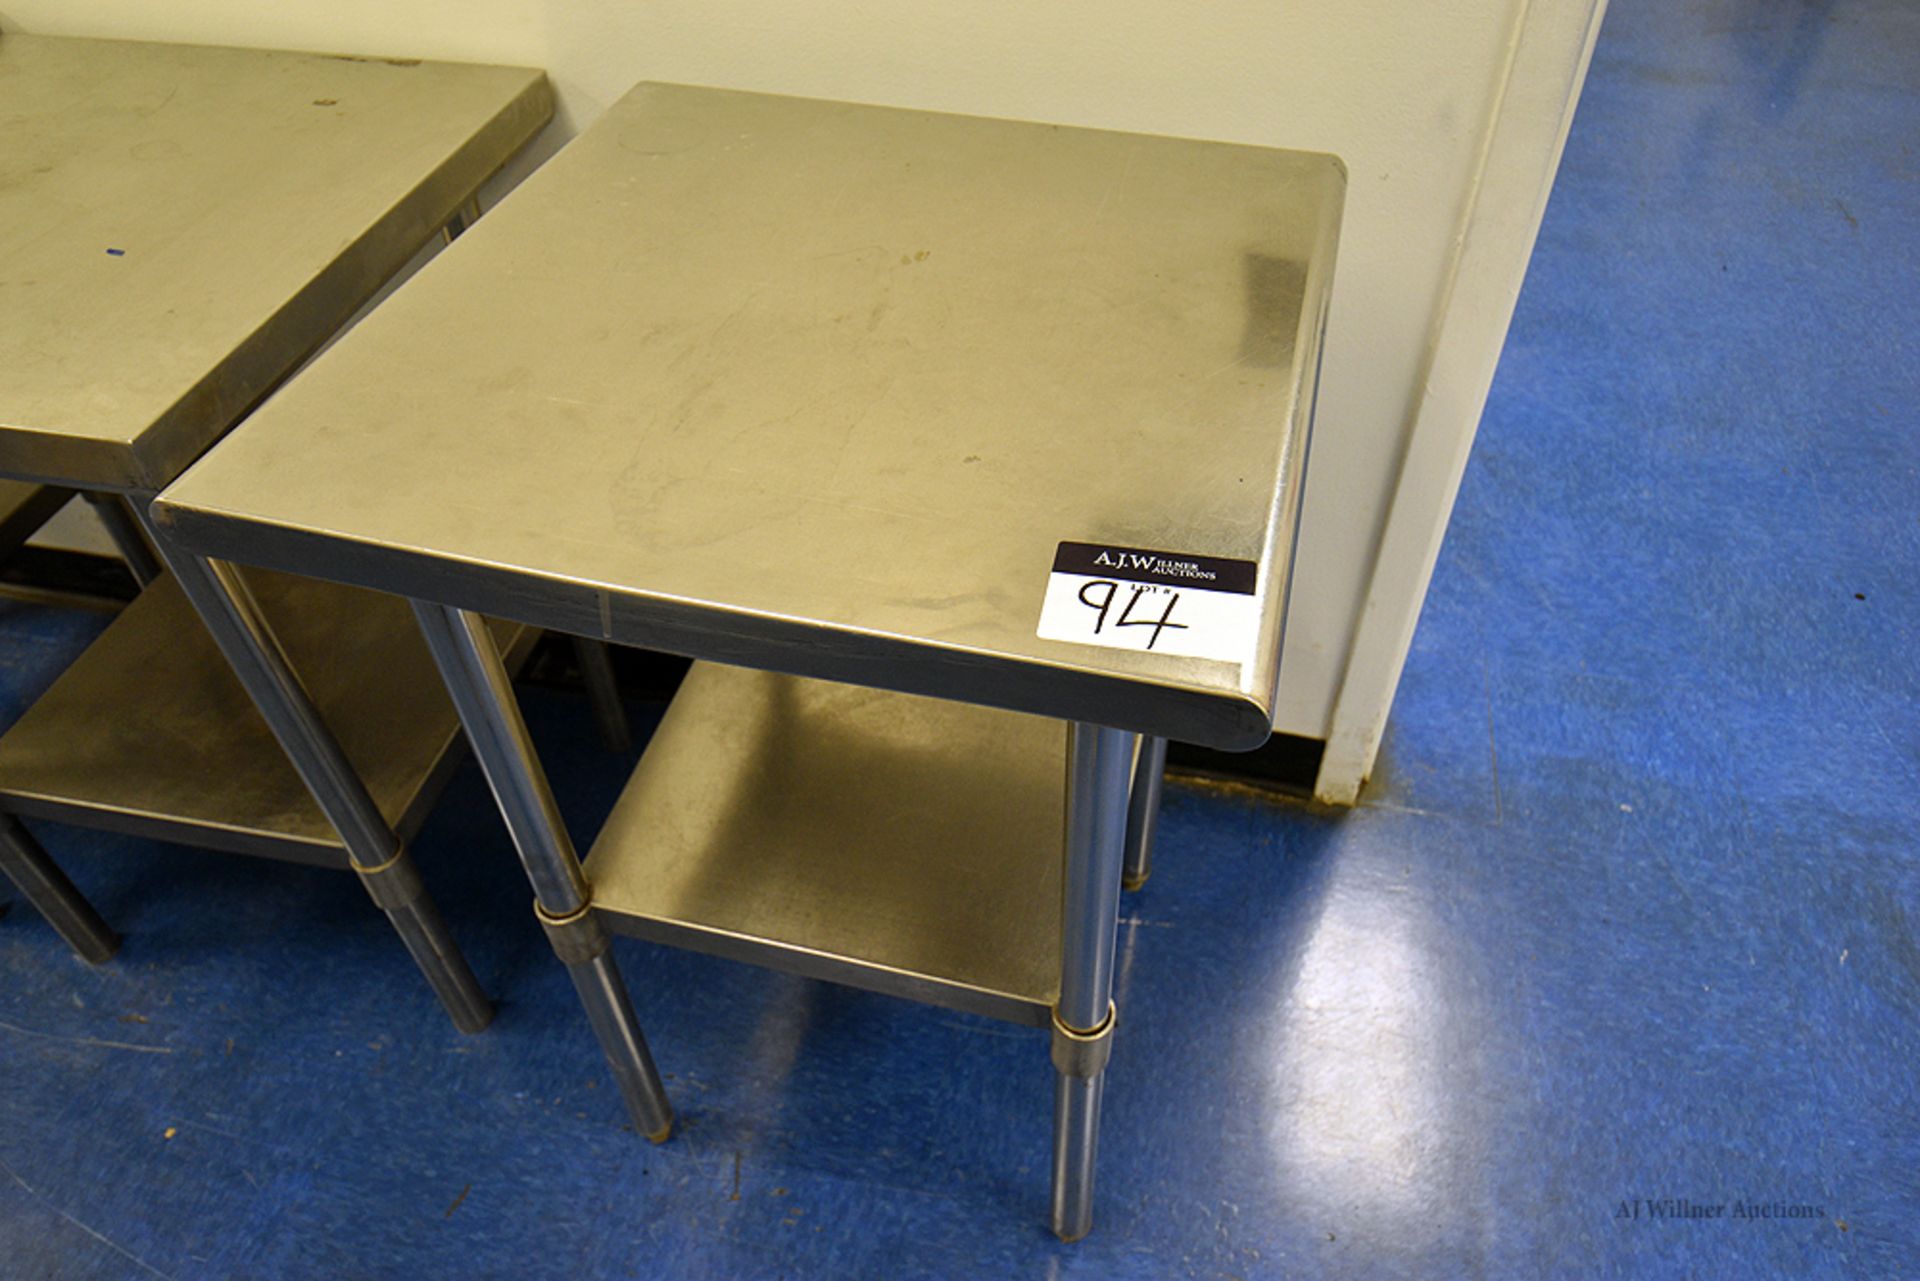 24"x24" Stainless Steel 2-Tier Work Tables